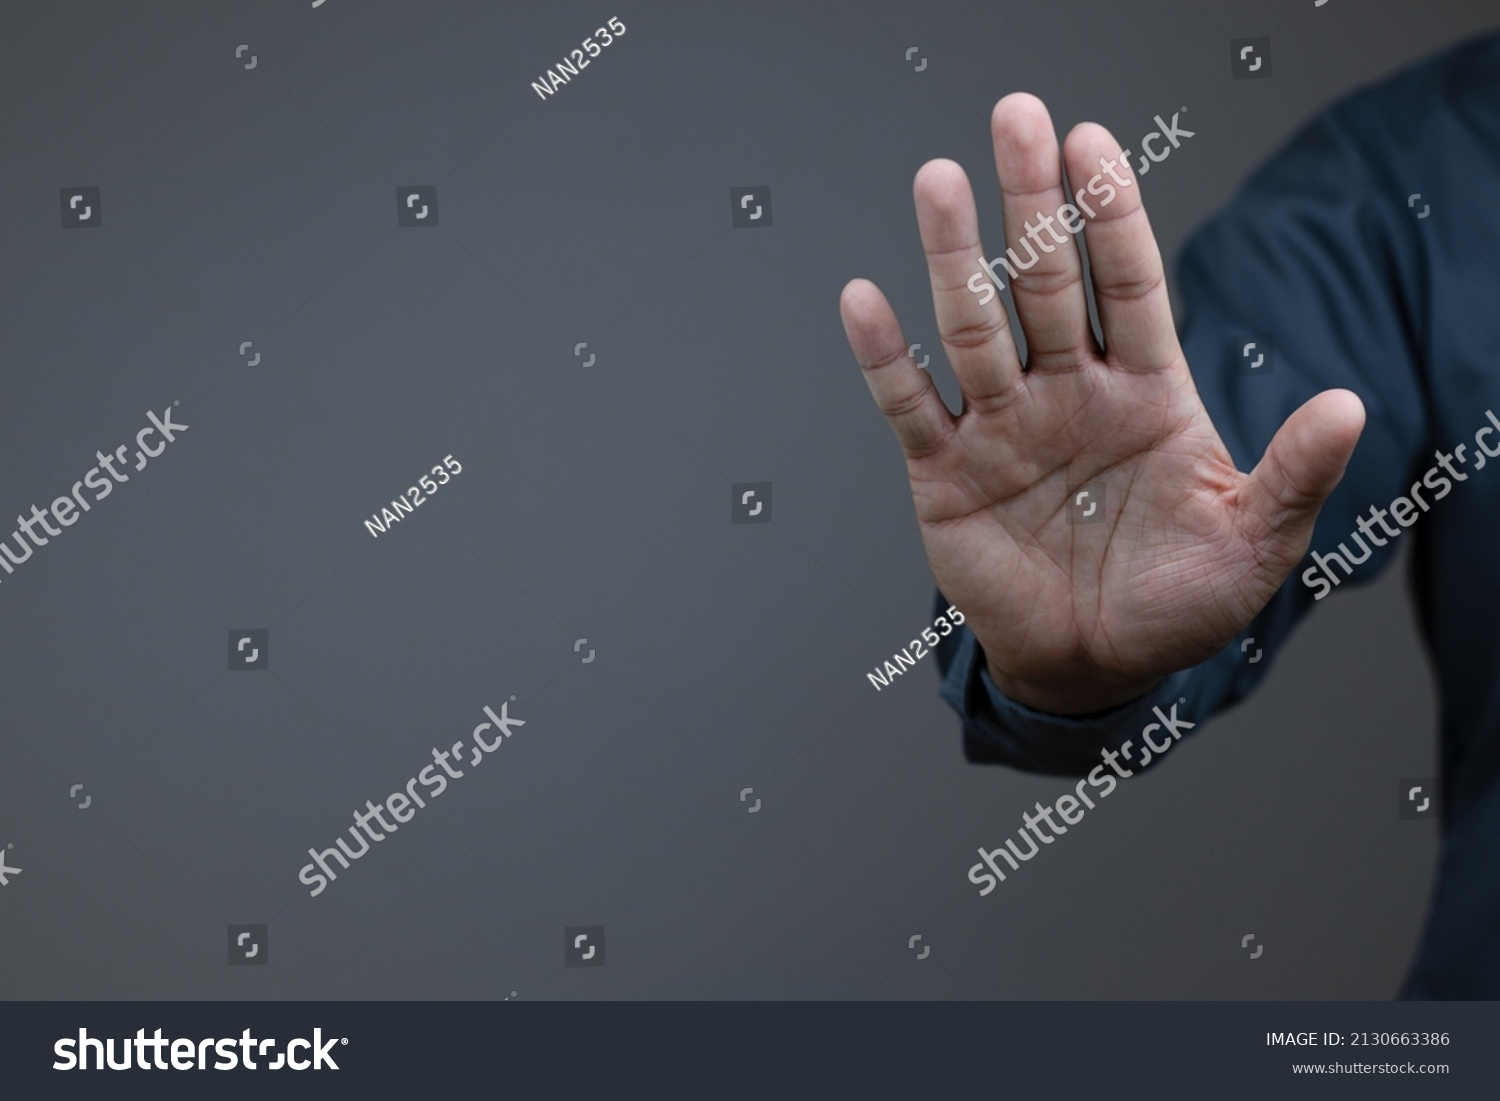 man showing stop gesture reject on black background with empty space for text, copy space, close up of the hand, anti concept, rejection
 #2130663386